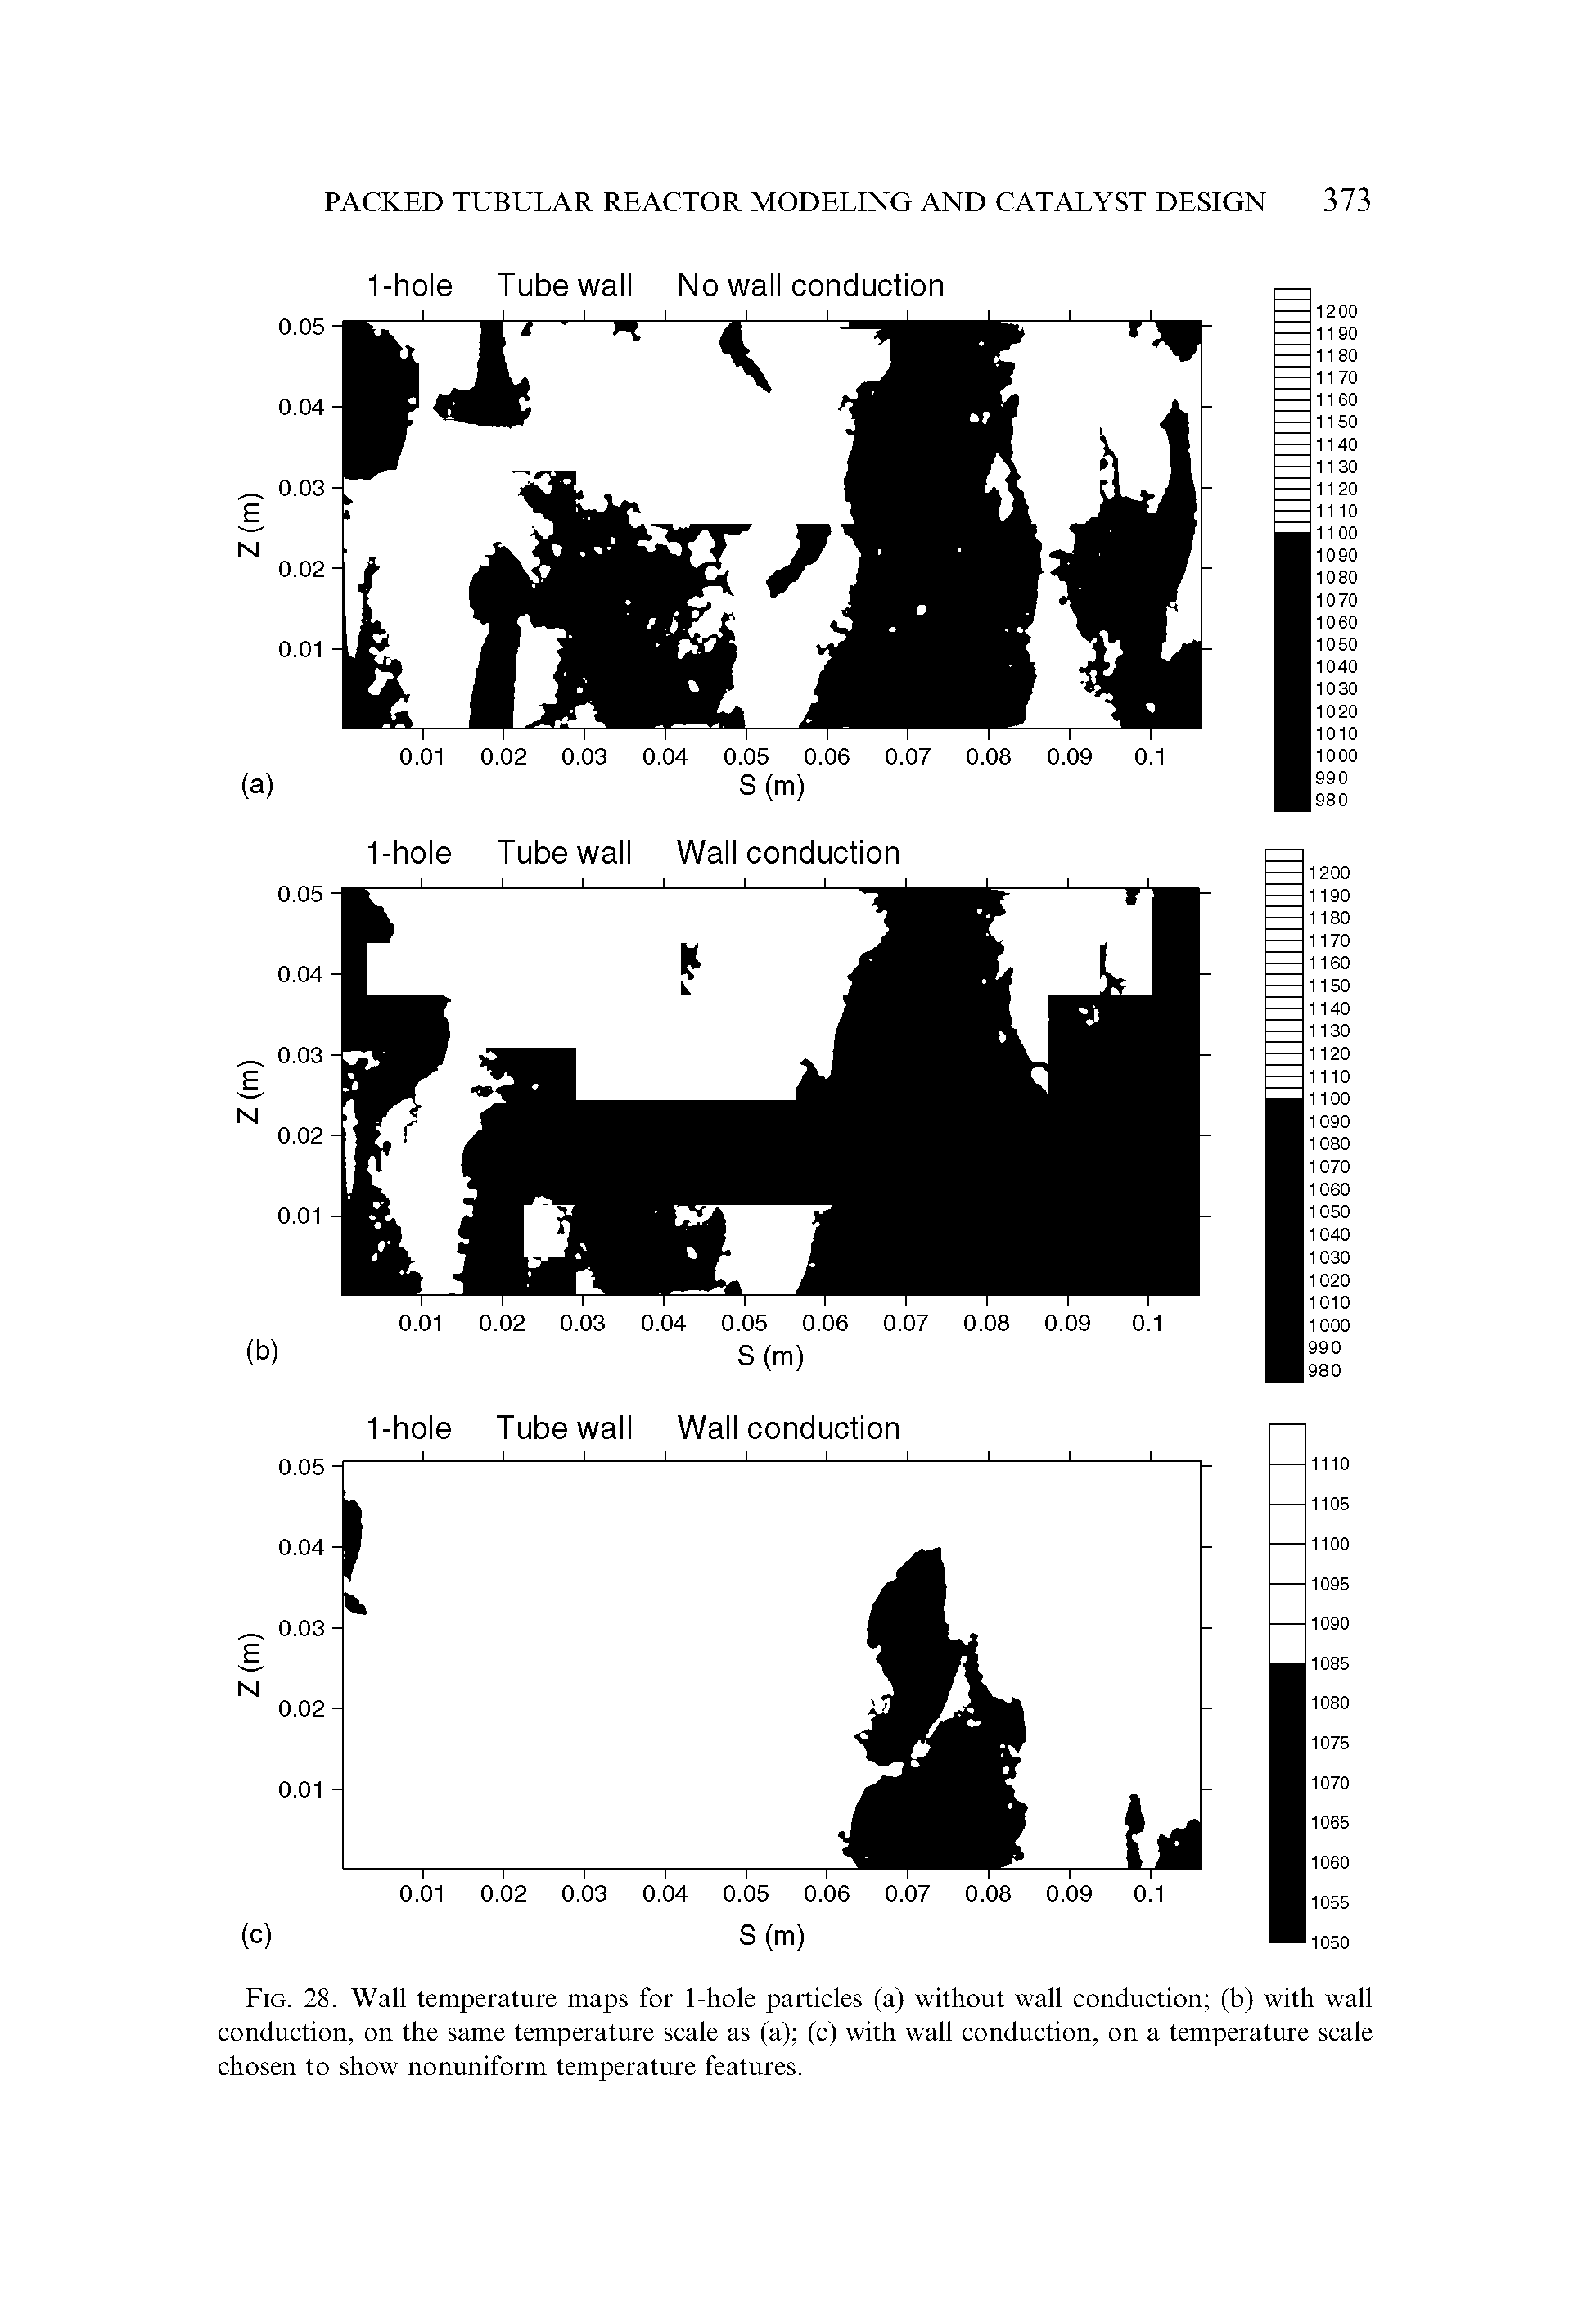 Fig. 28. Wall temperature maps for 1-hole particles (a) without wall conduction (b) with wall conduction, on the same temperature scale as (a) (c) with wall conduction, on a temperature scale chosen to show nonuniform temperature features.